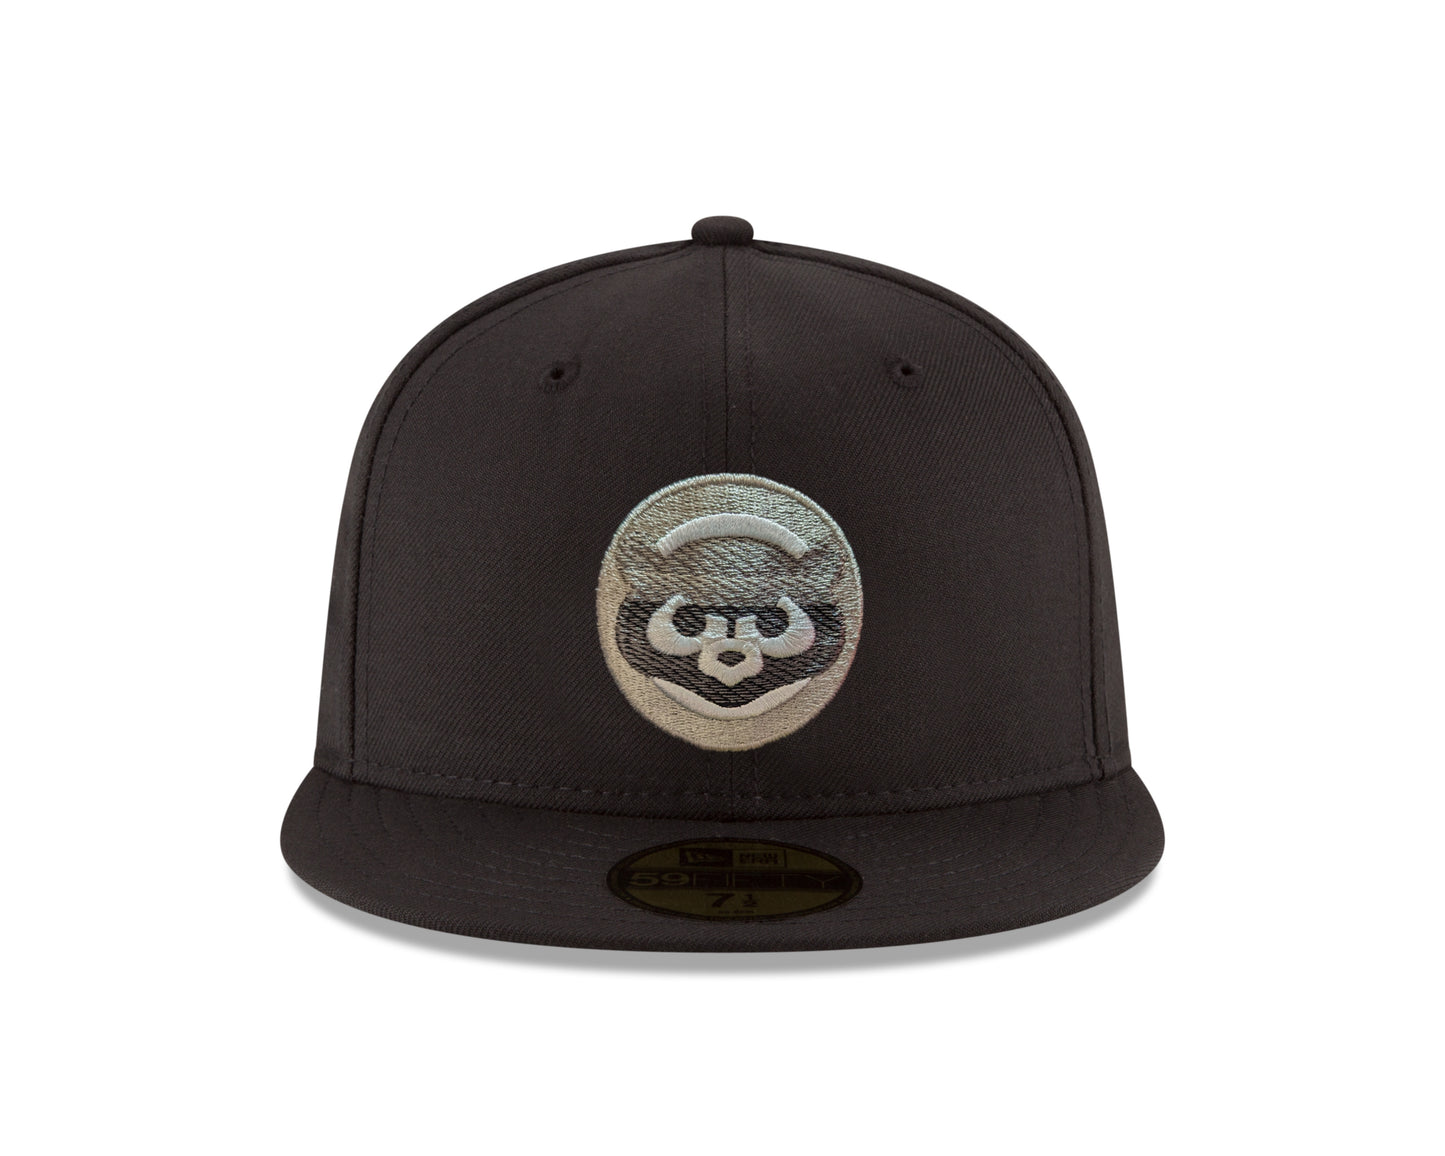 Chicago Cubs New Era Black Static 59FIFTY Fitted Hat